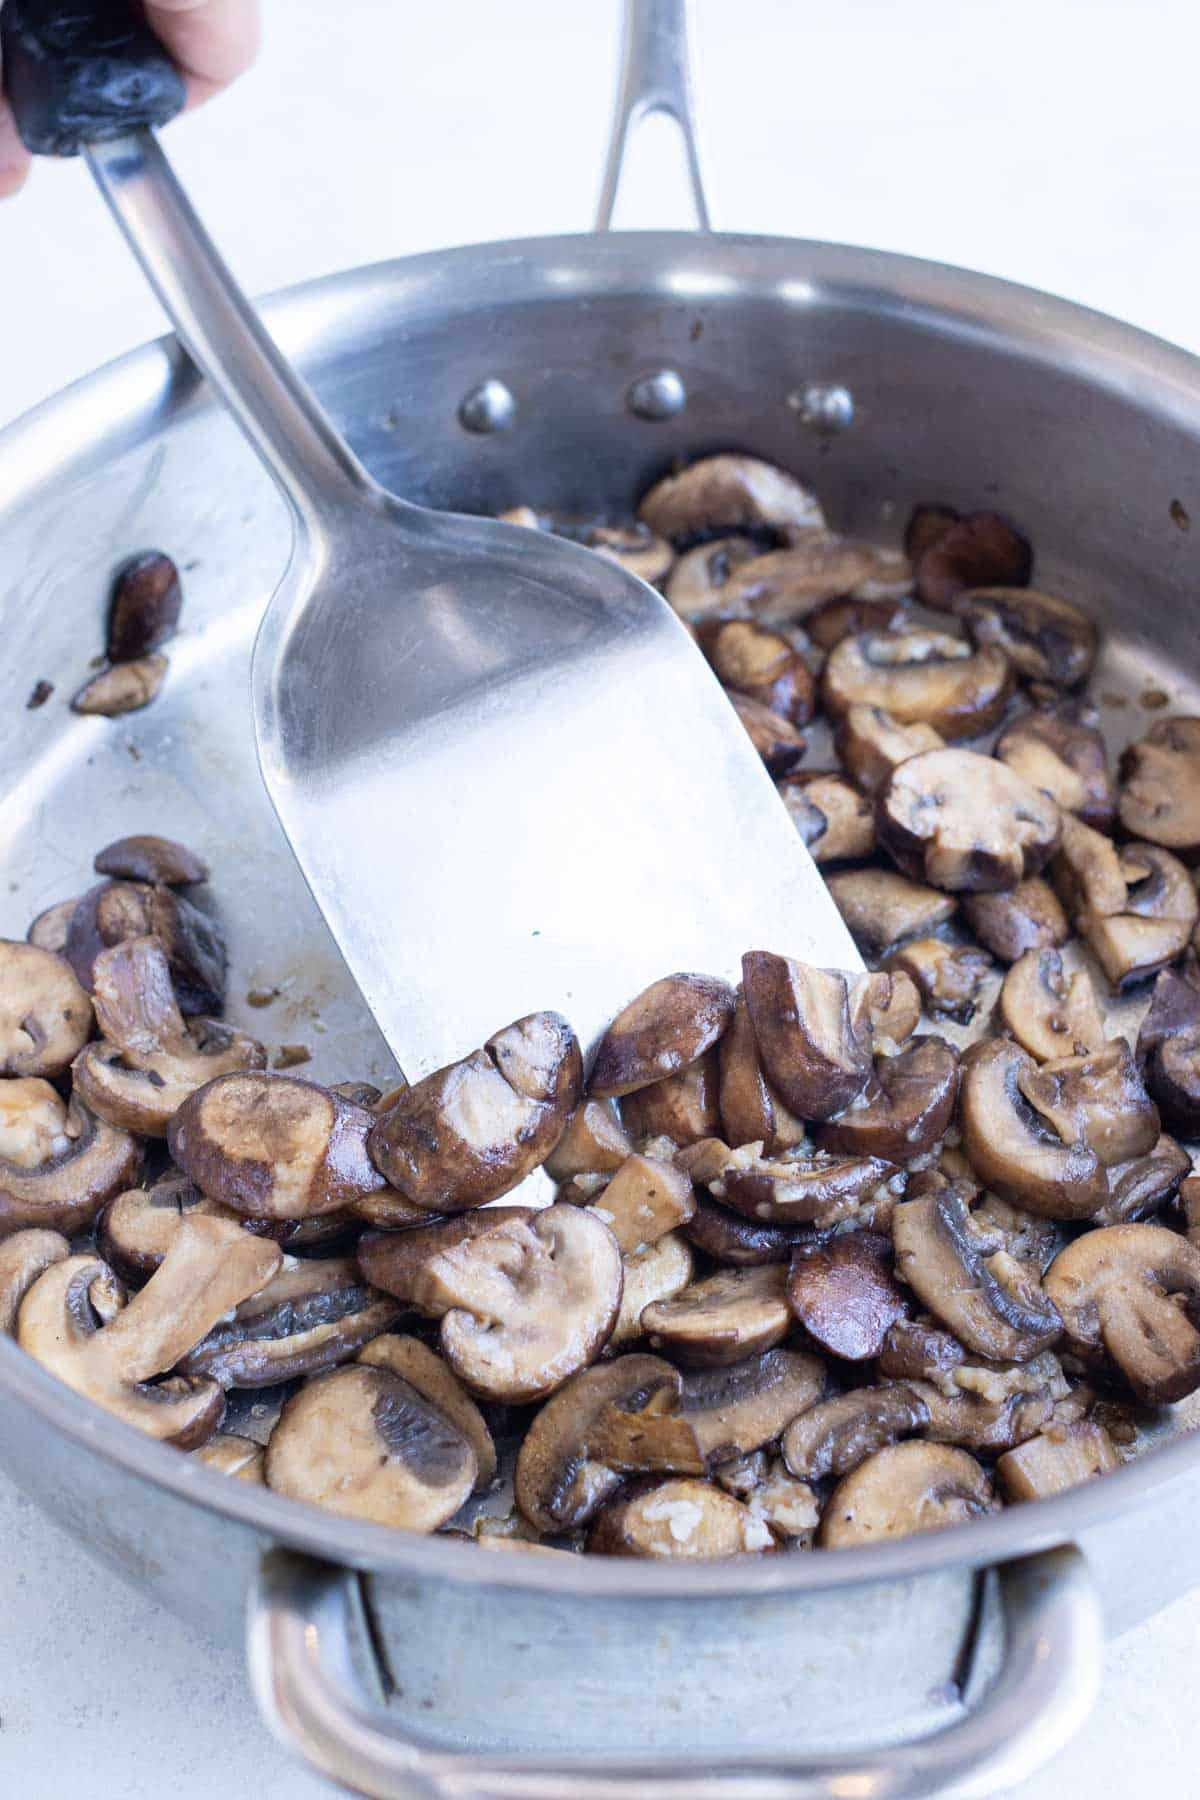 Mushrooms are sauteed in a skillet.